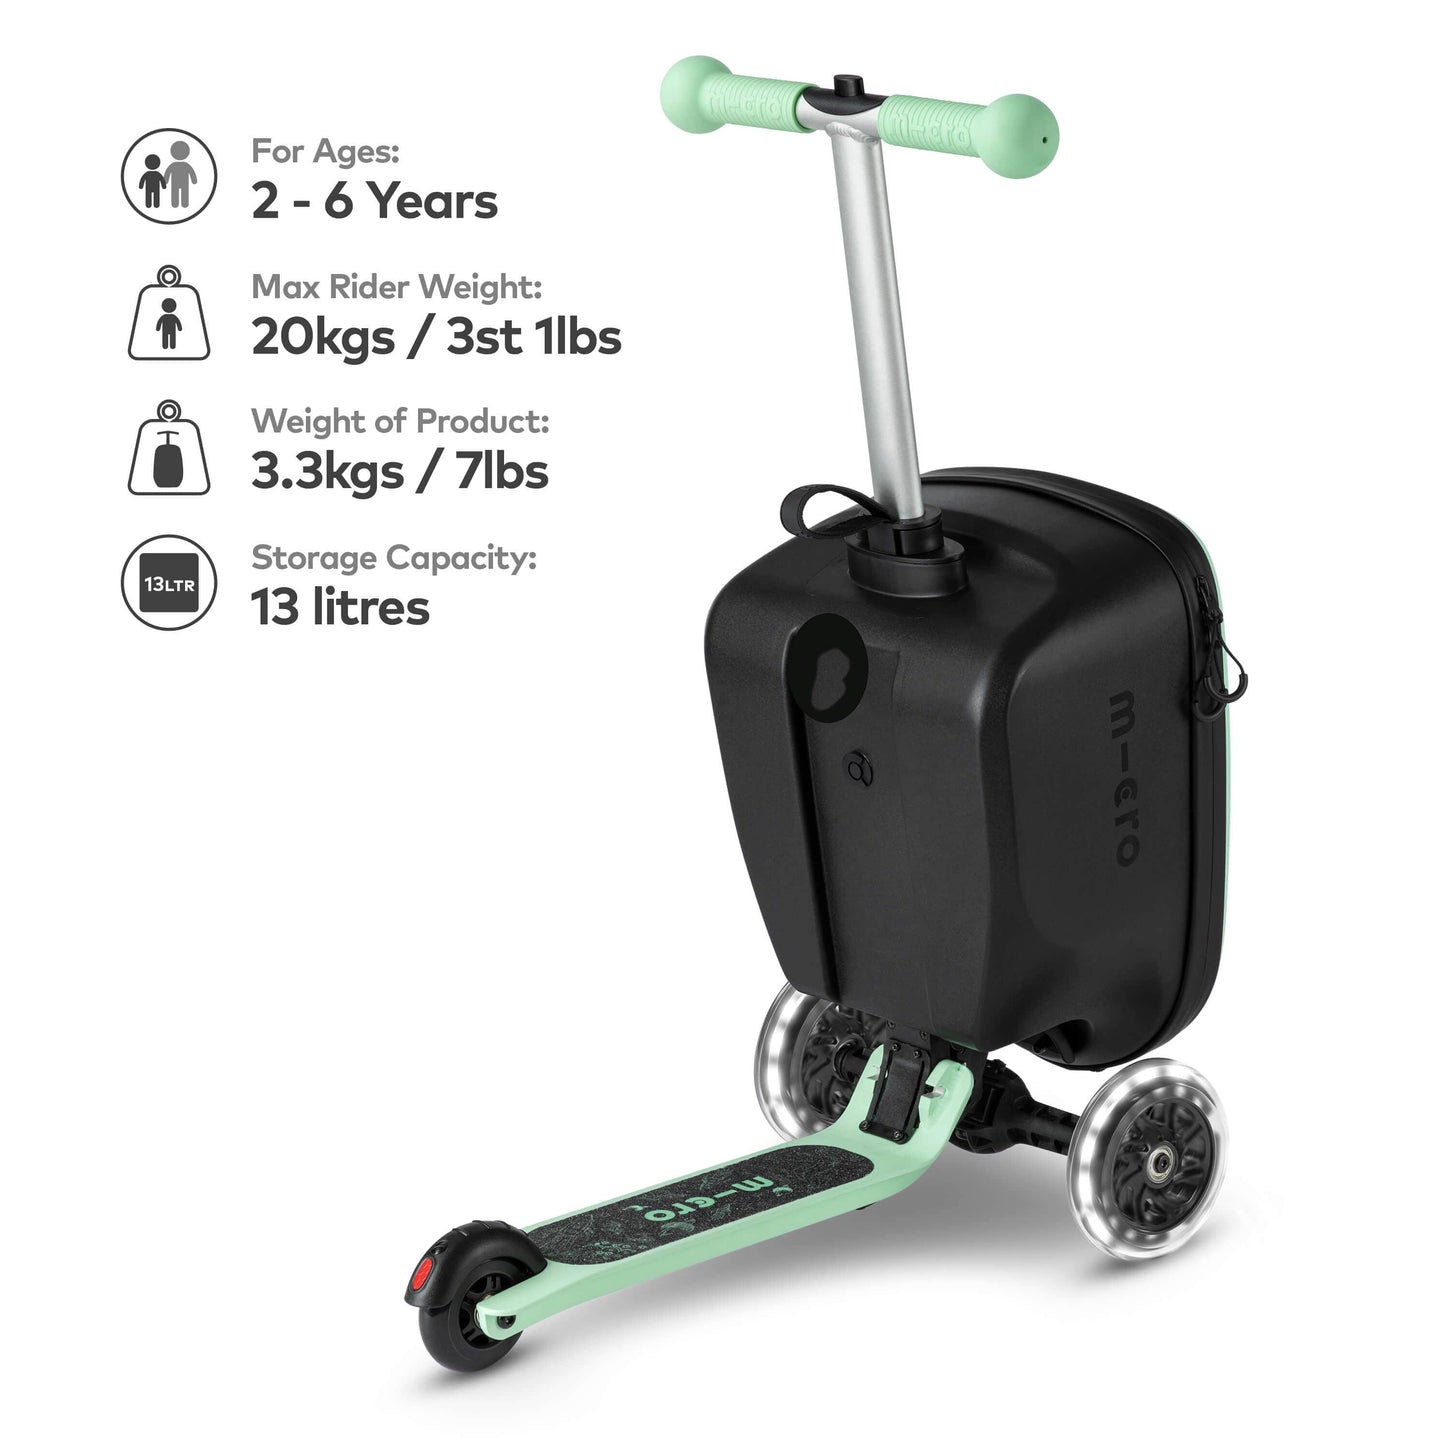 Micro Scooter Mini Mint Luggage Scooter size and weight guide